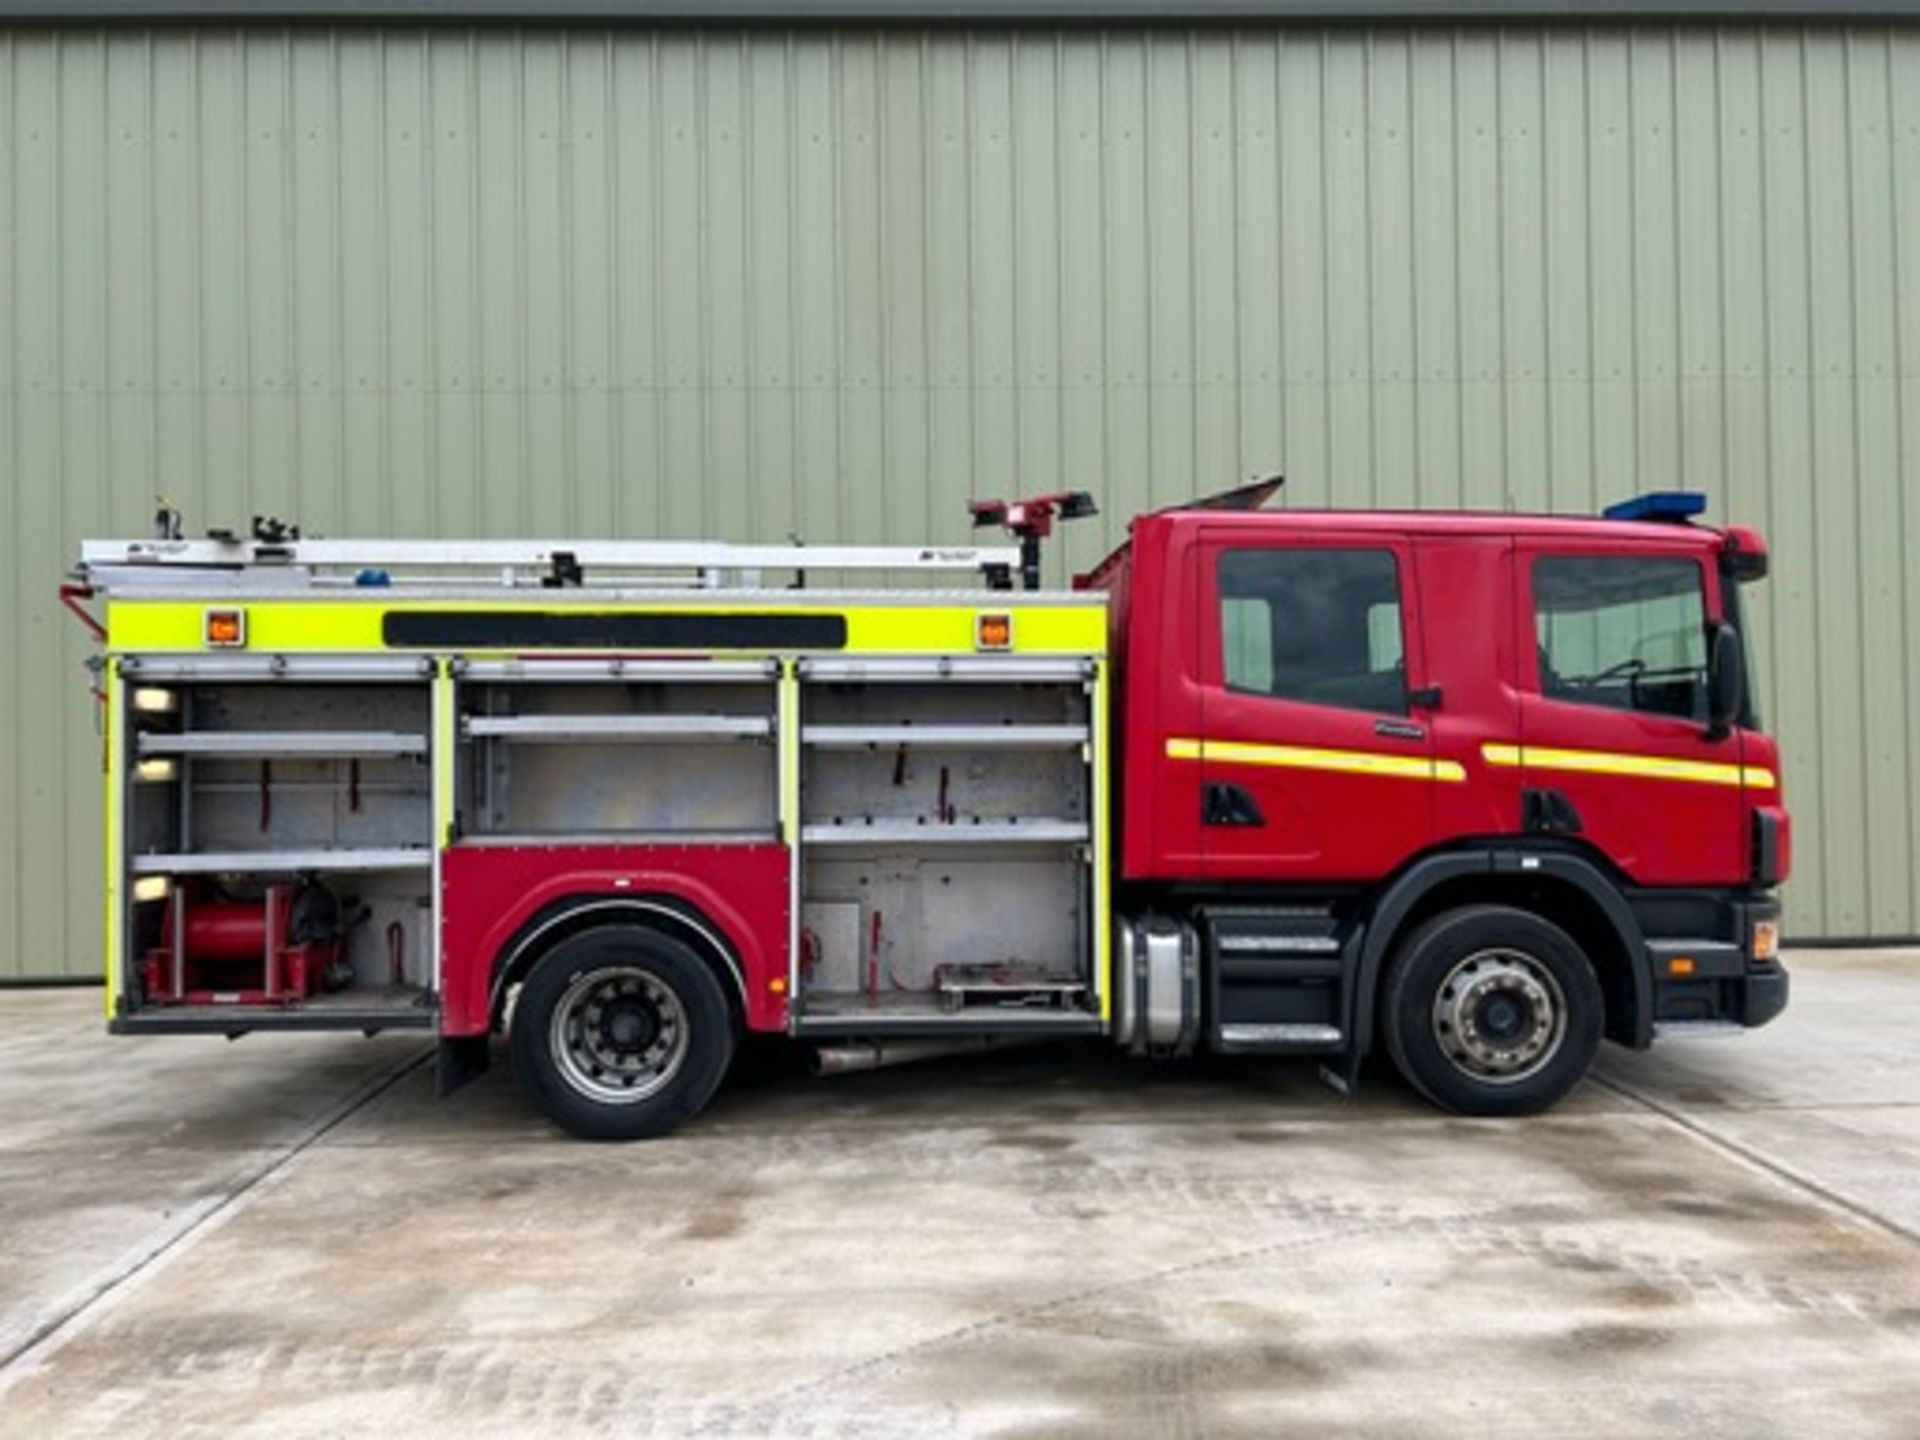 Scania Excalibur 94D 260 Fire Appliance - Image 10 of 26